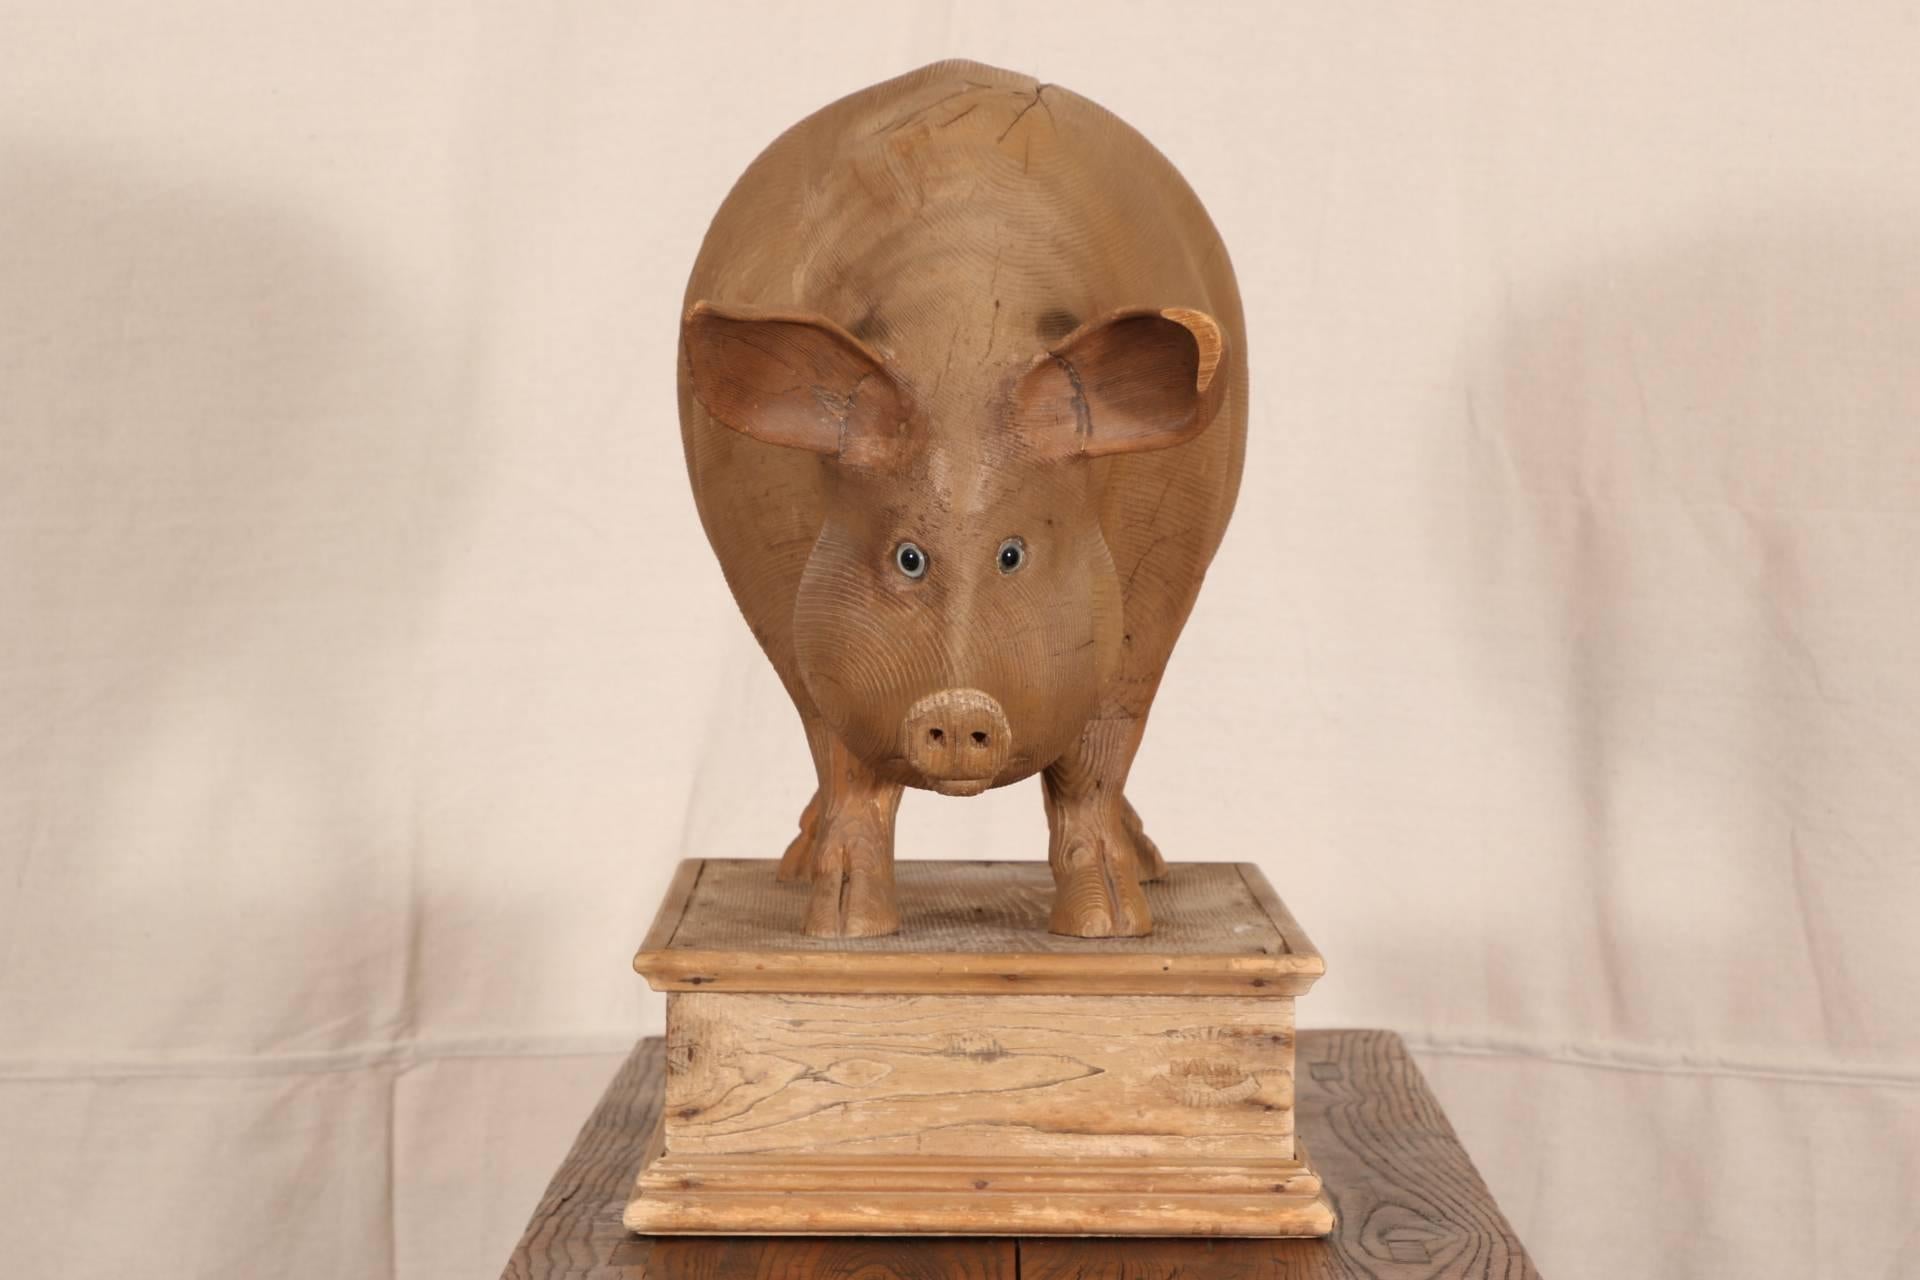 Carved pine pig sculpture, mounted on a carved rectangular base, with glass eyes.

Condition: Expected wear and signs of use including some surface scratching and sporadic nicking, some checking, chip to left ear.